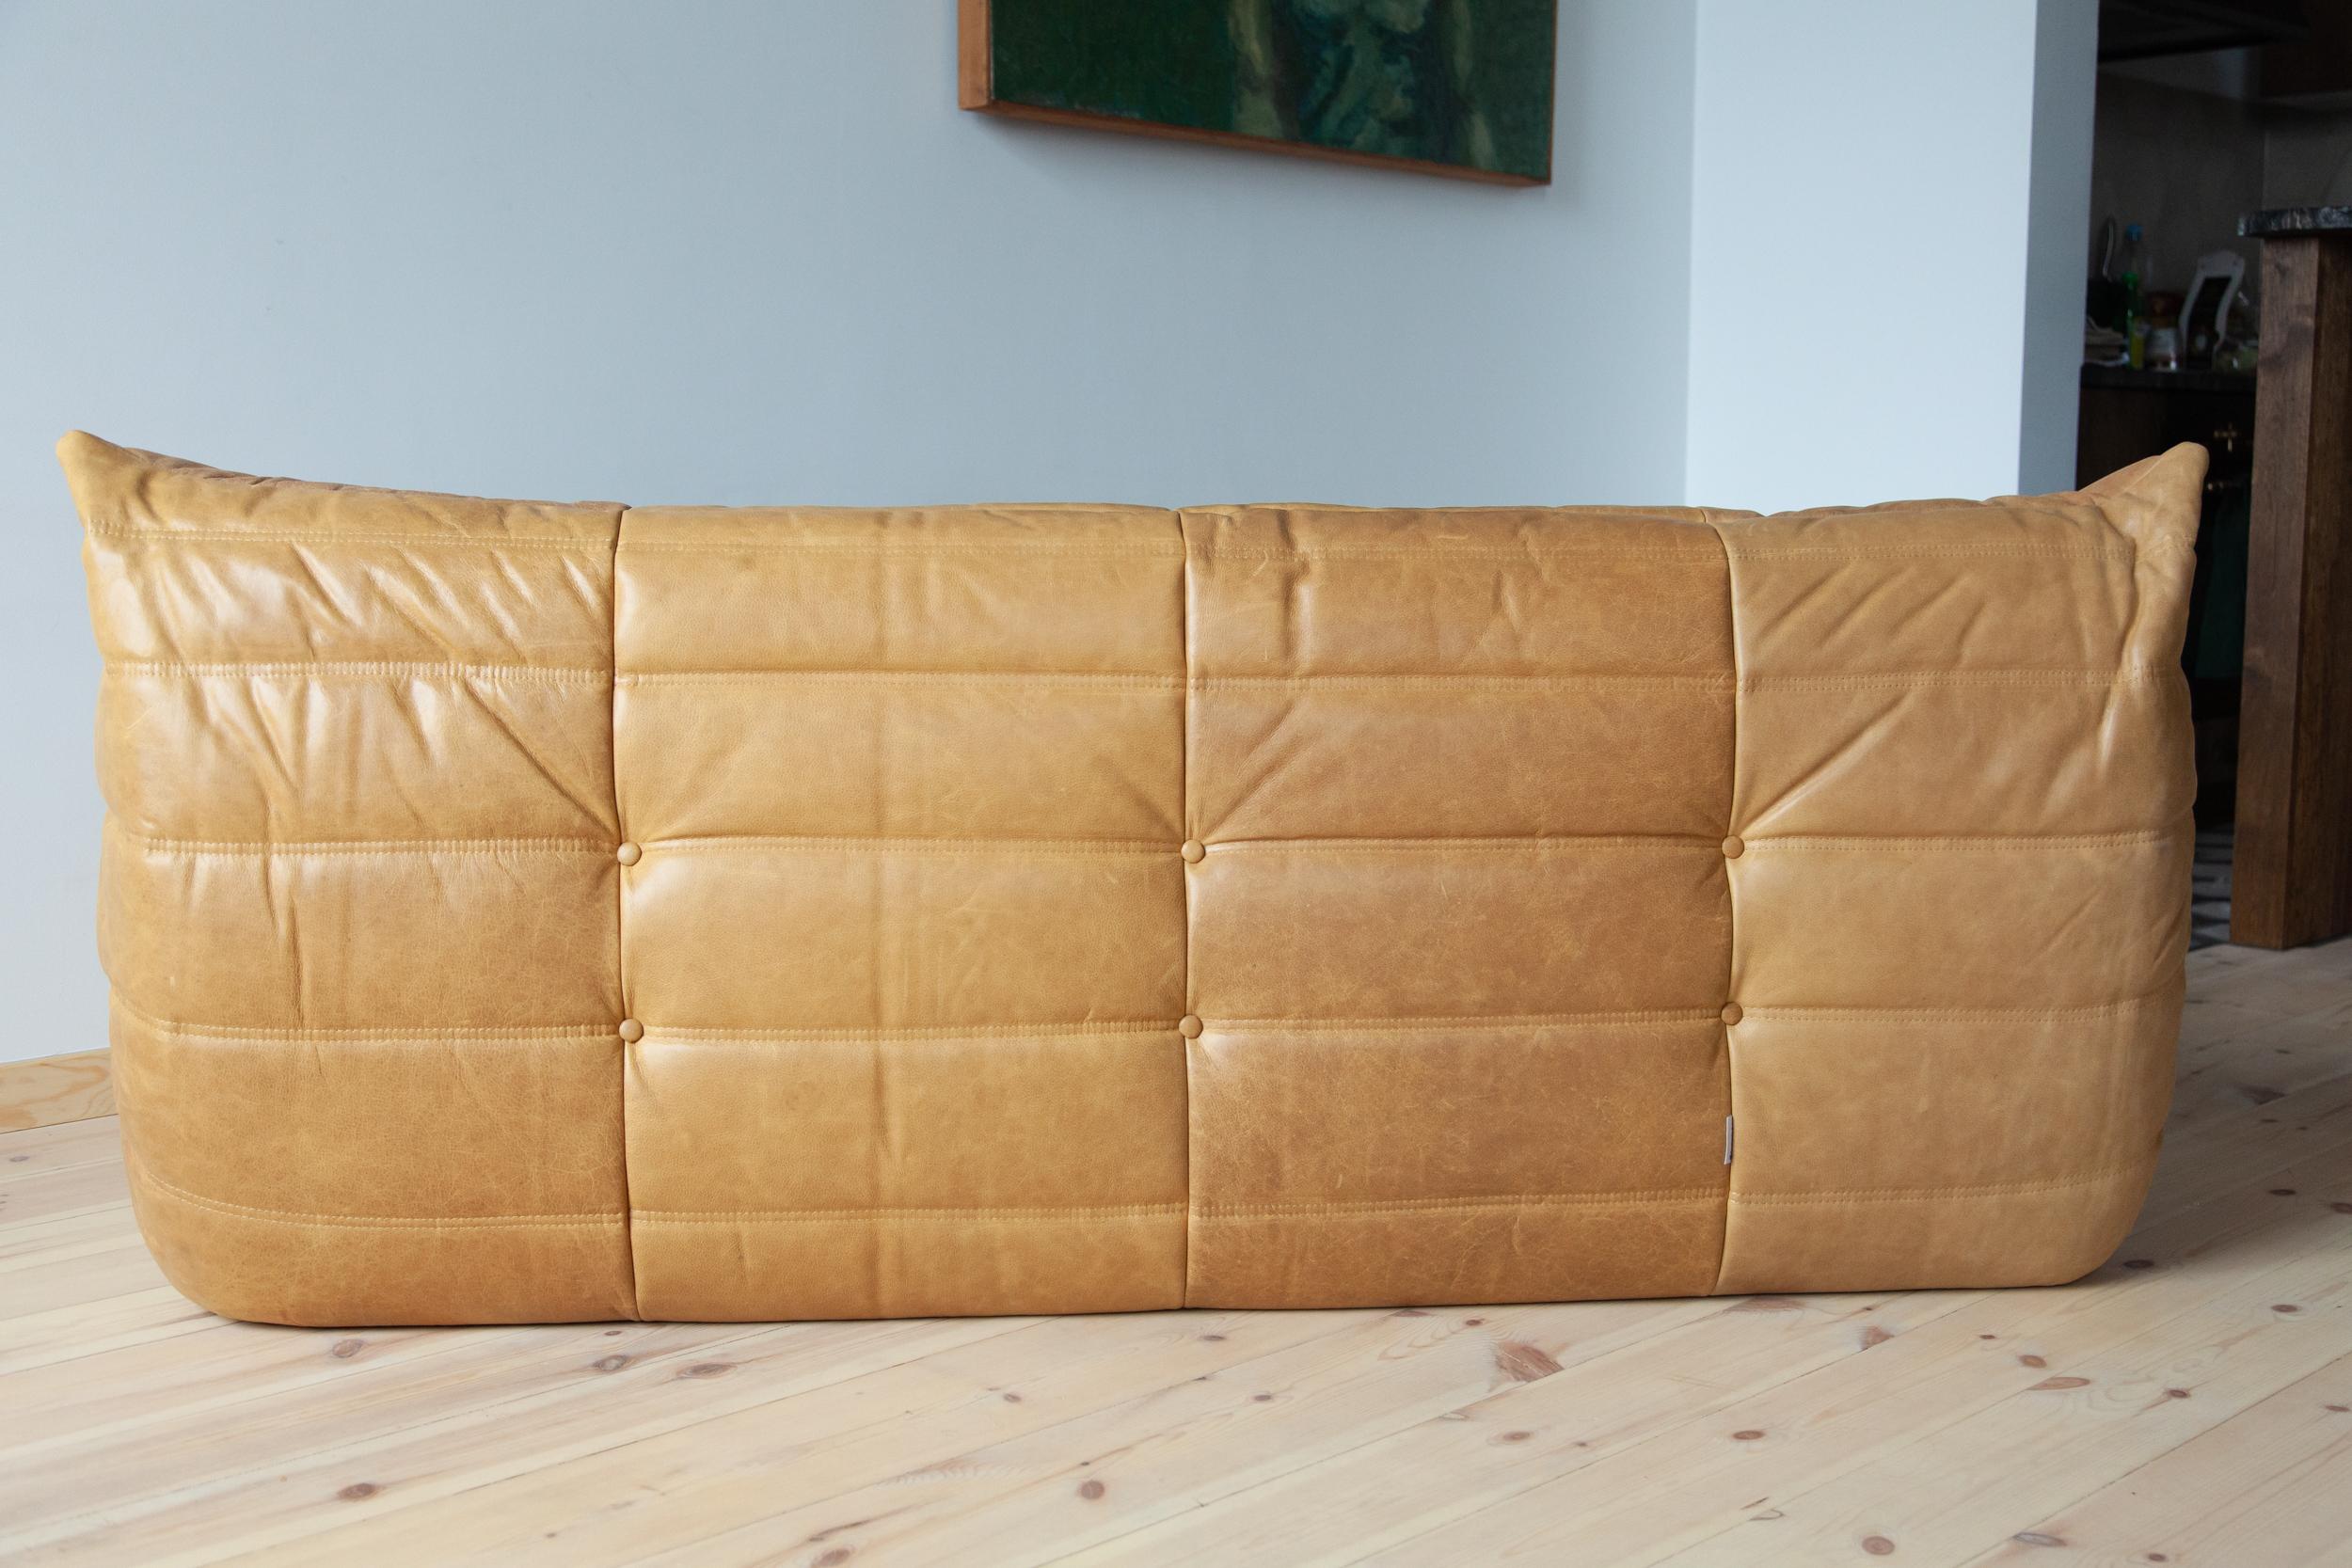 Late 20th Century Togo 3-Seat Sofa in Camel Brown Leather by Michel Ducaroy for Ligne Roset For Sale